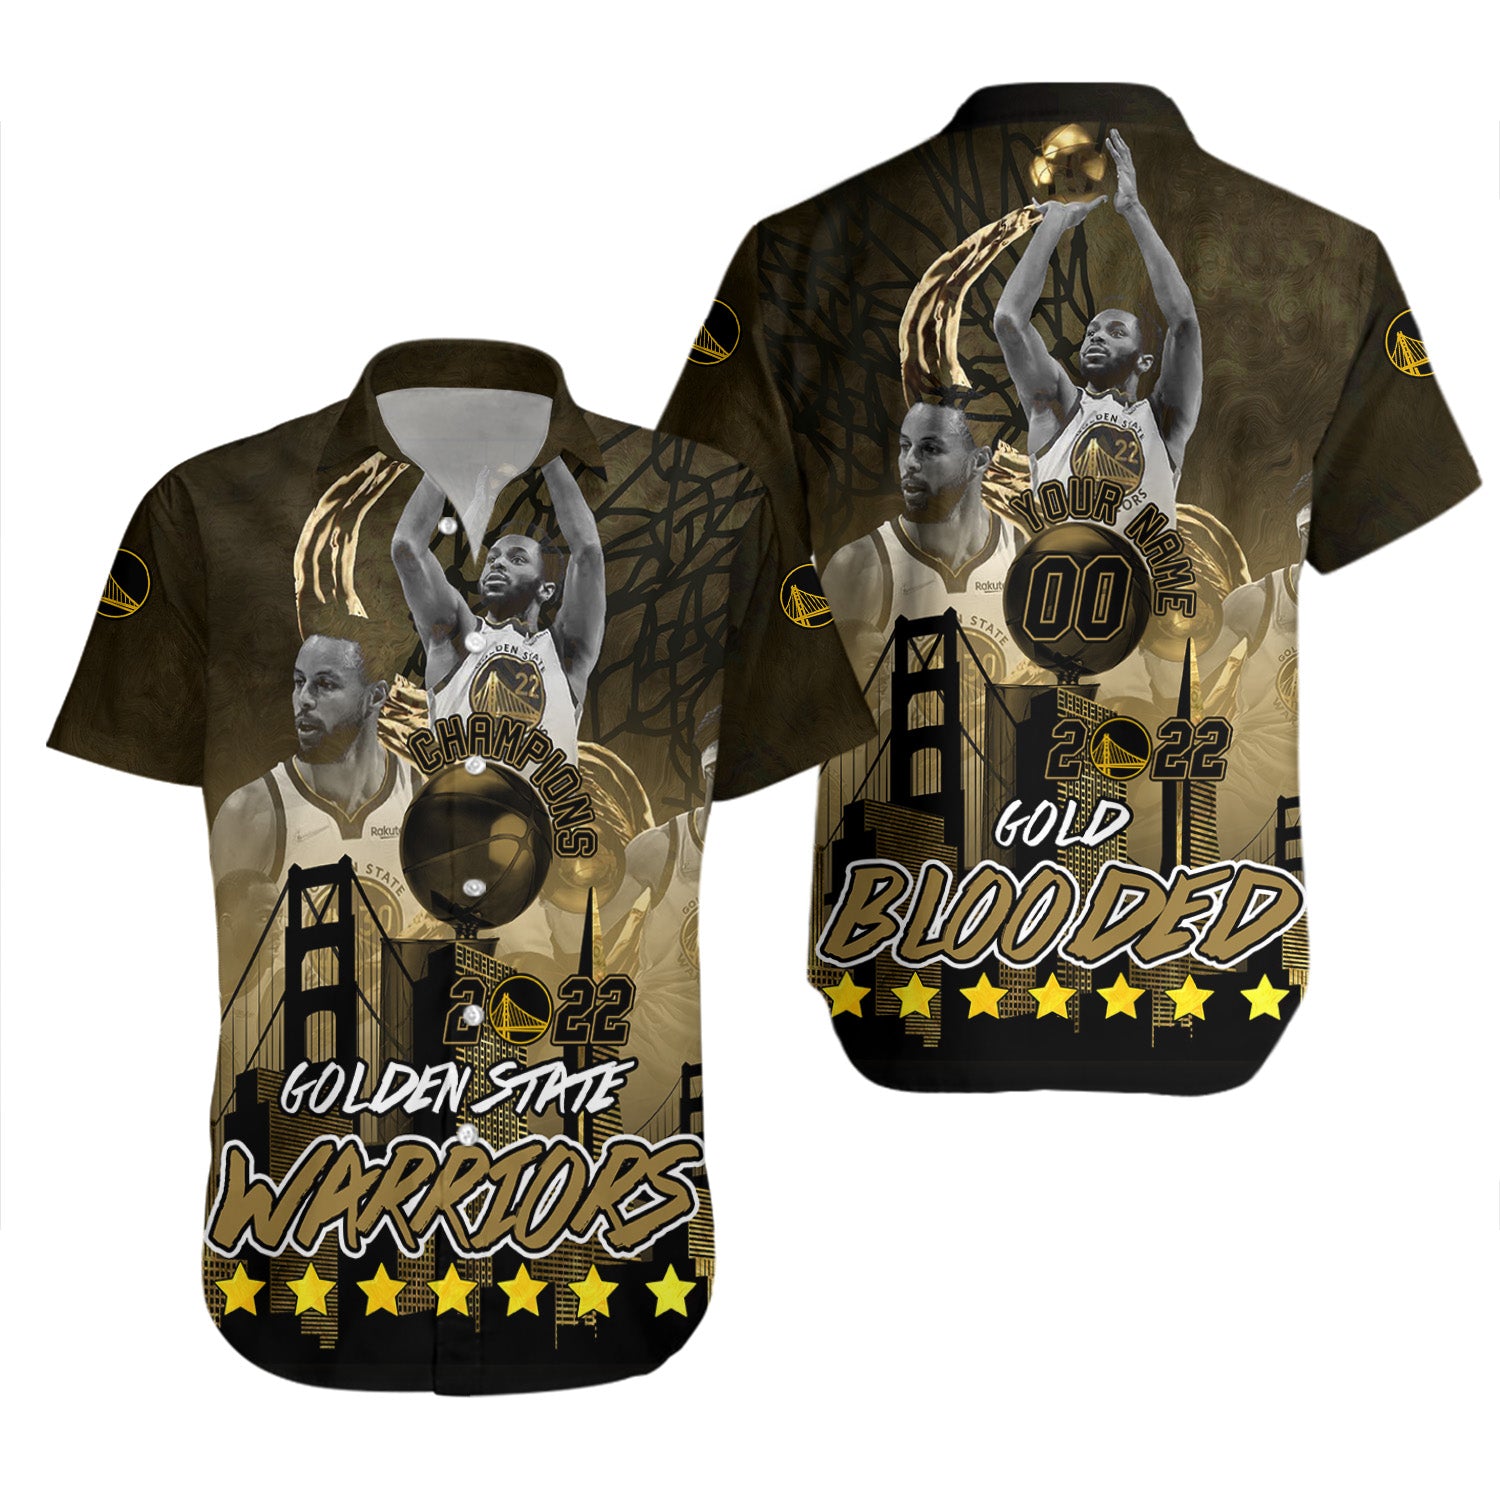 Golden State Warriors Hawaiian Shirt Set Personalized Gold Blooded 2022 Champions - NBA 2